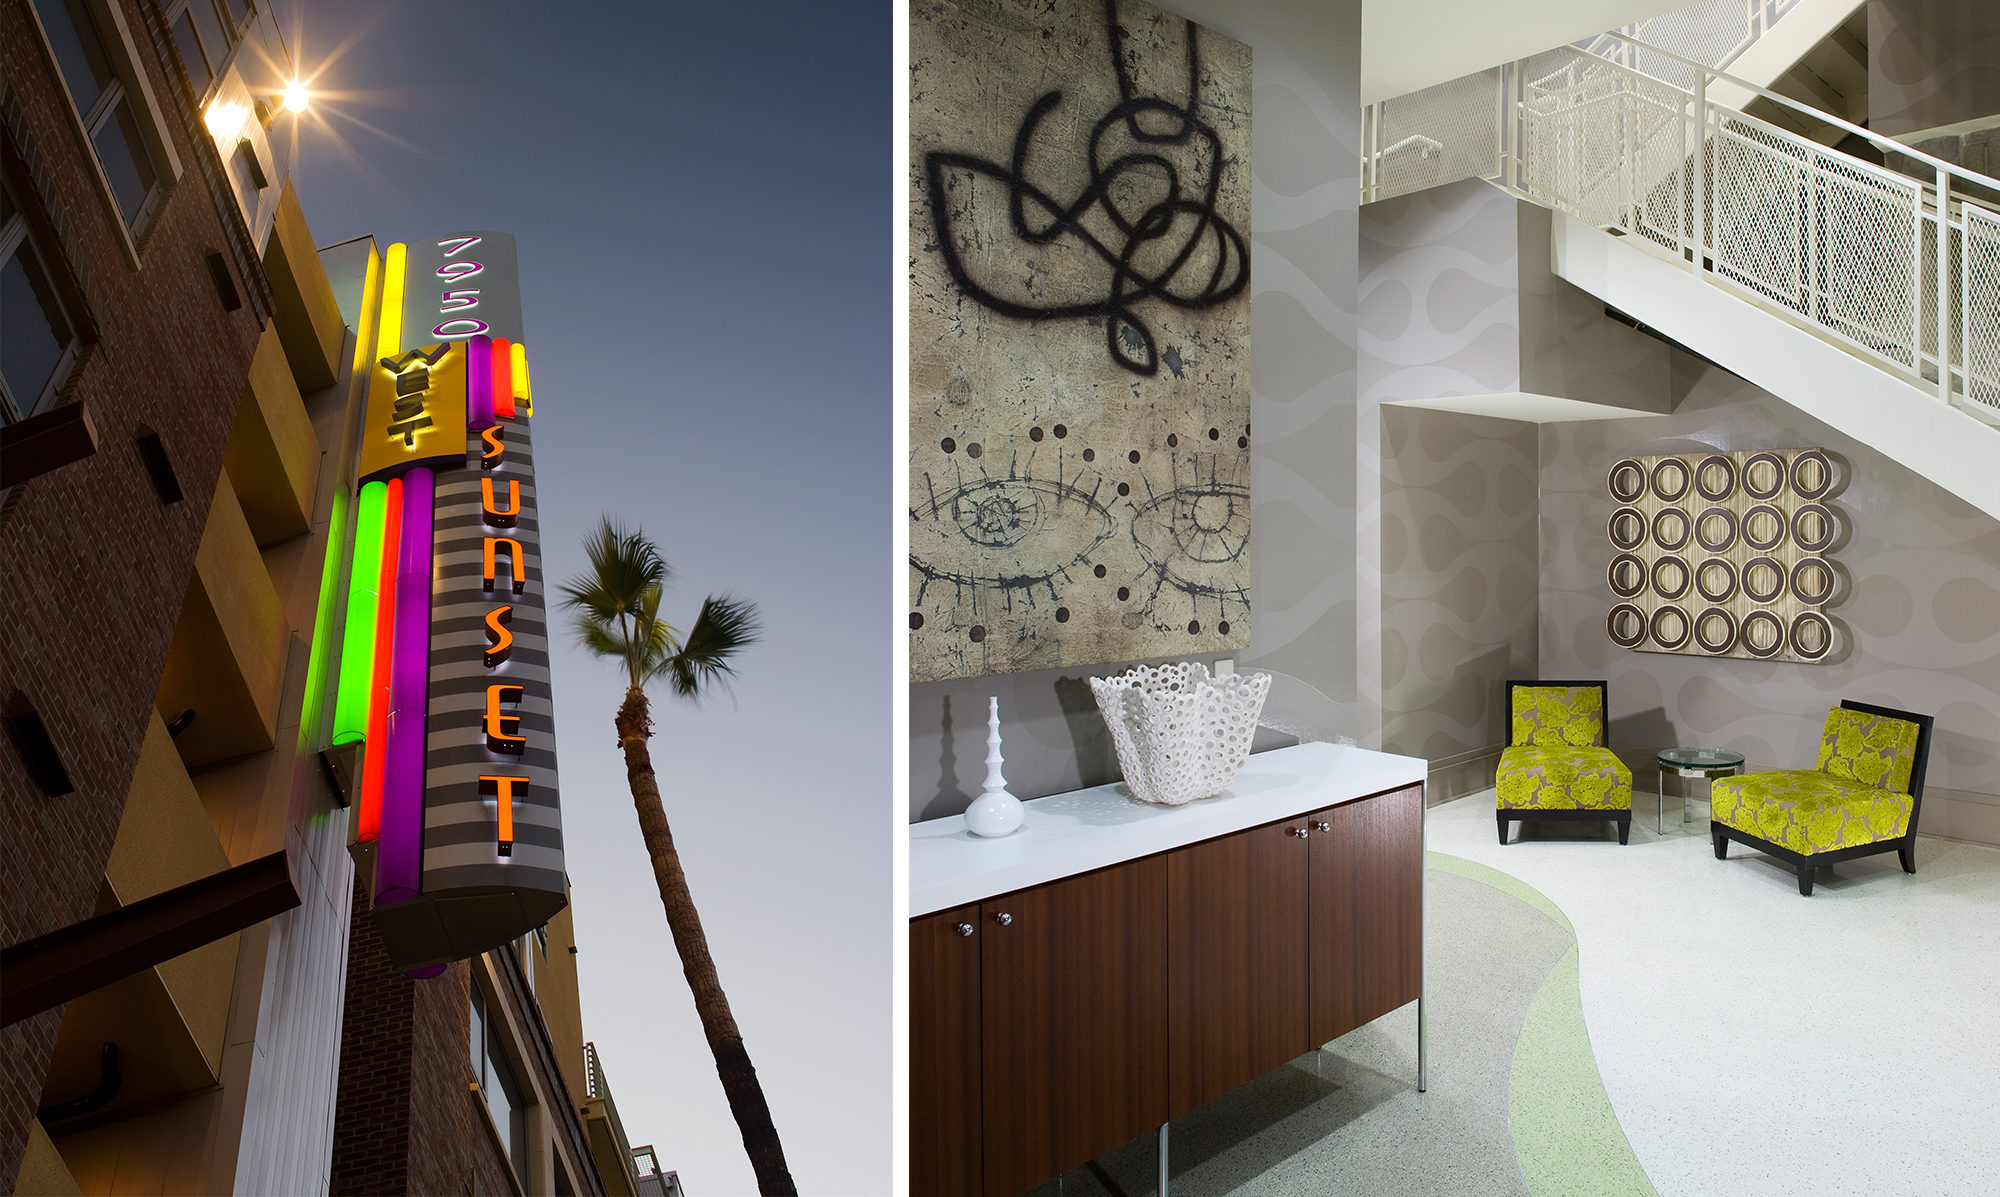 Collage of building signage "West Sunset" and lobby area with stair case.